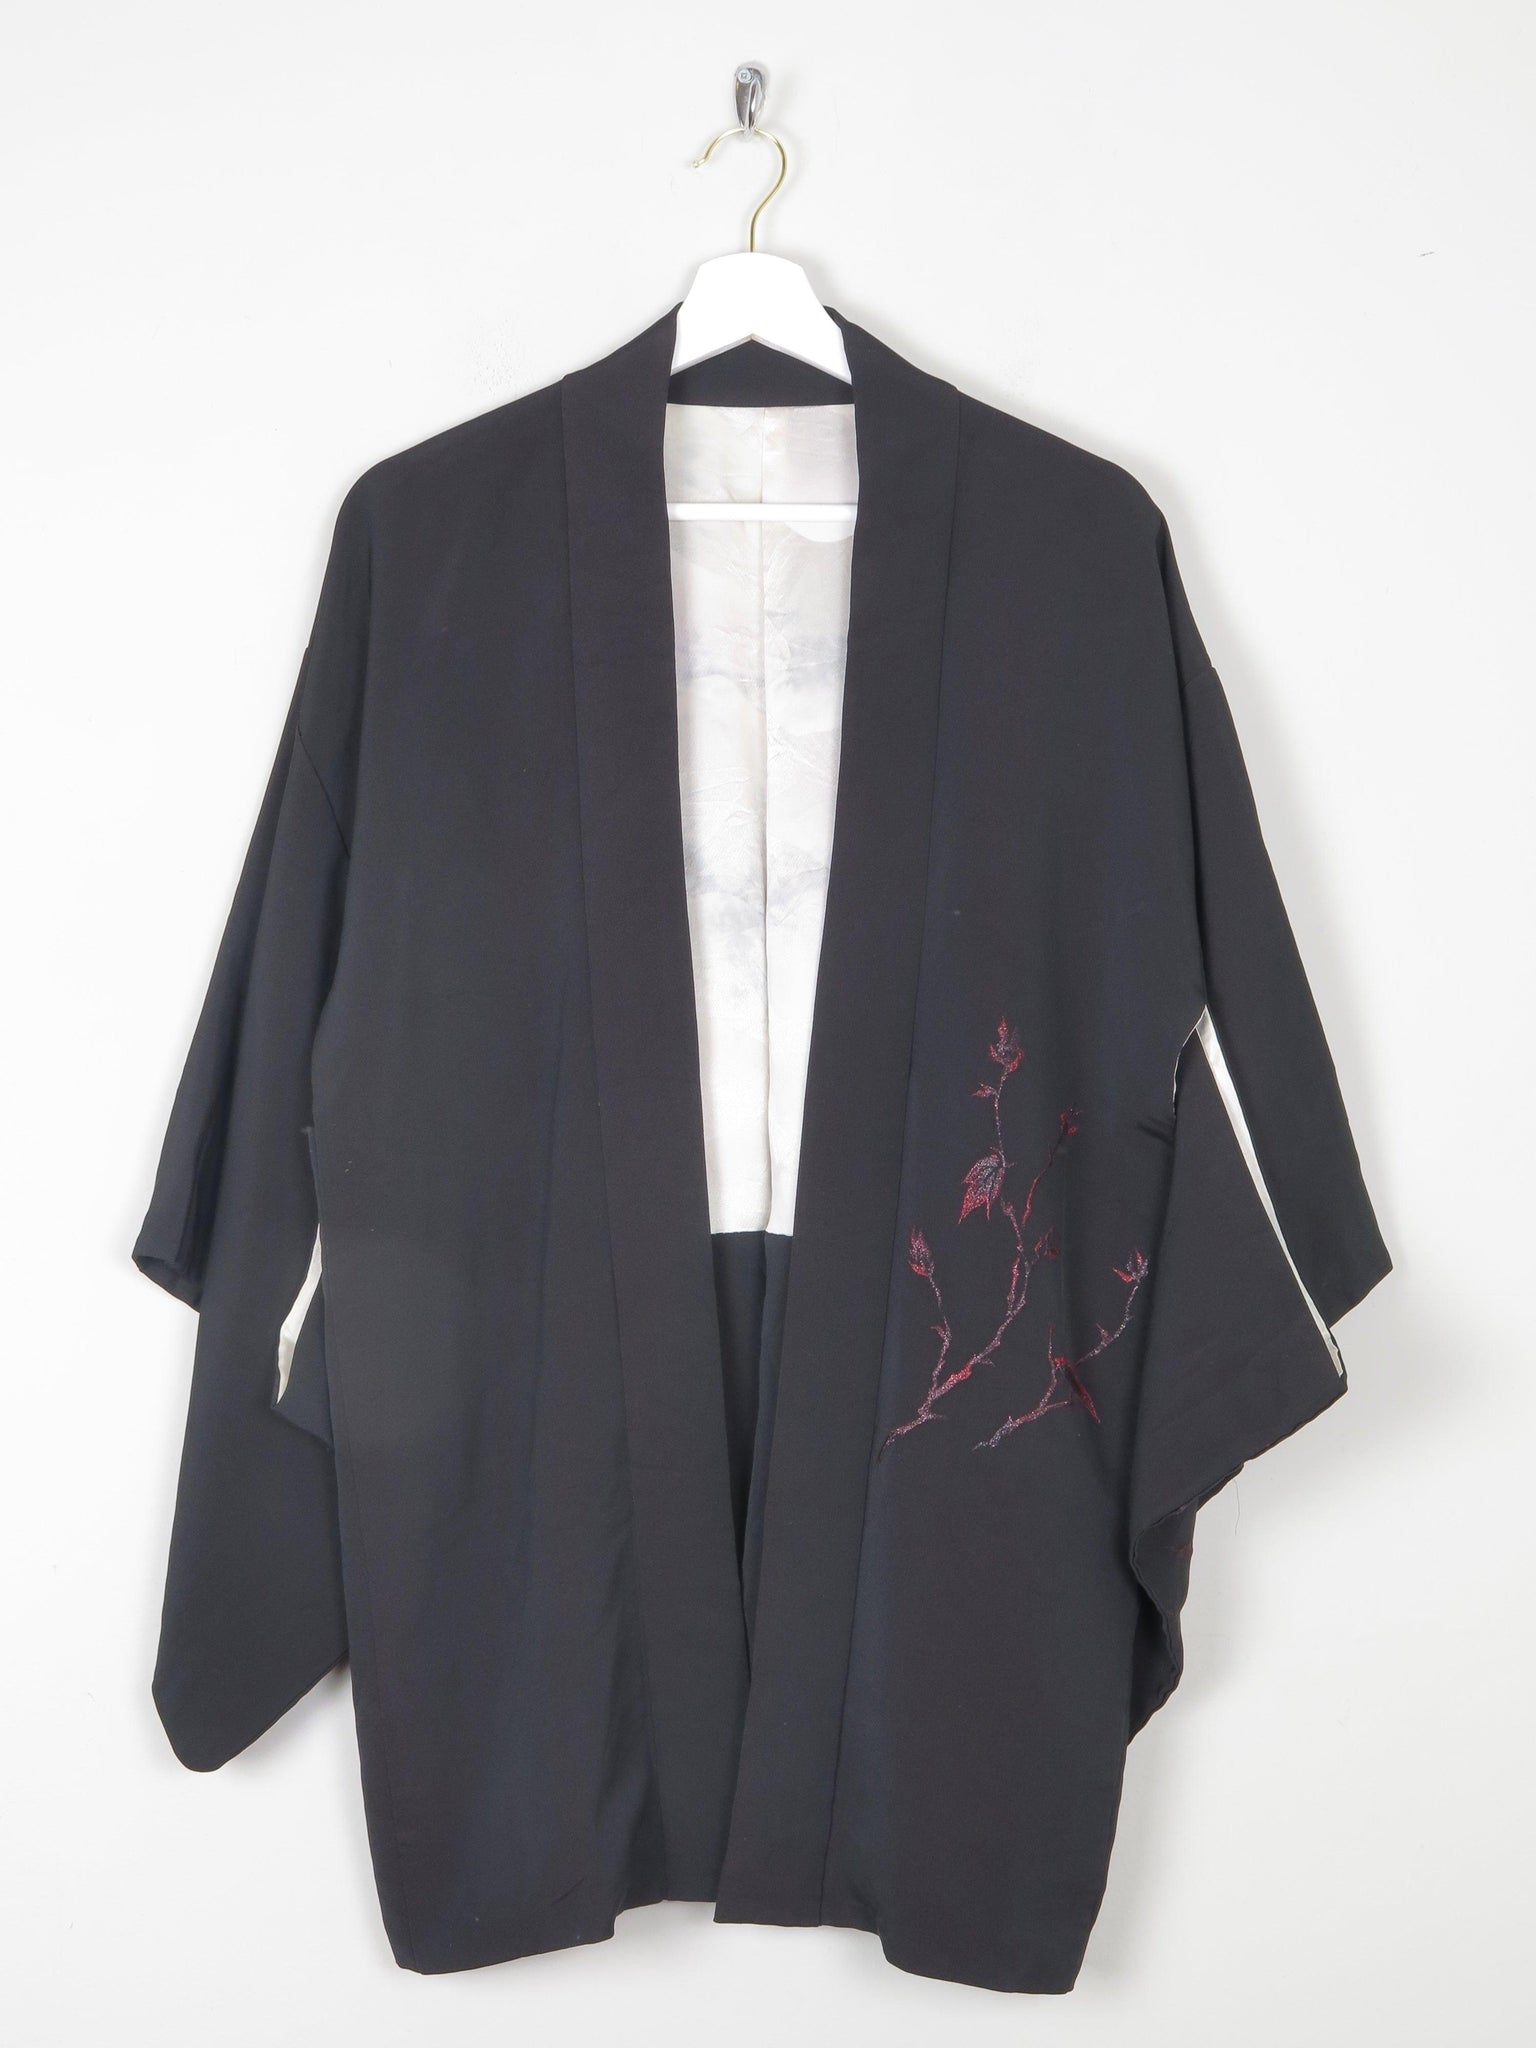 Black Vintage Kimono With Red Motifs S/M - The Harlequin